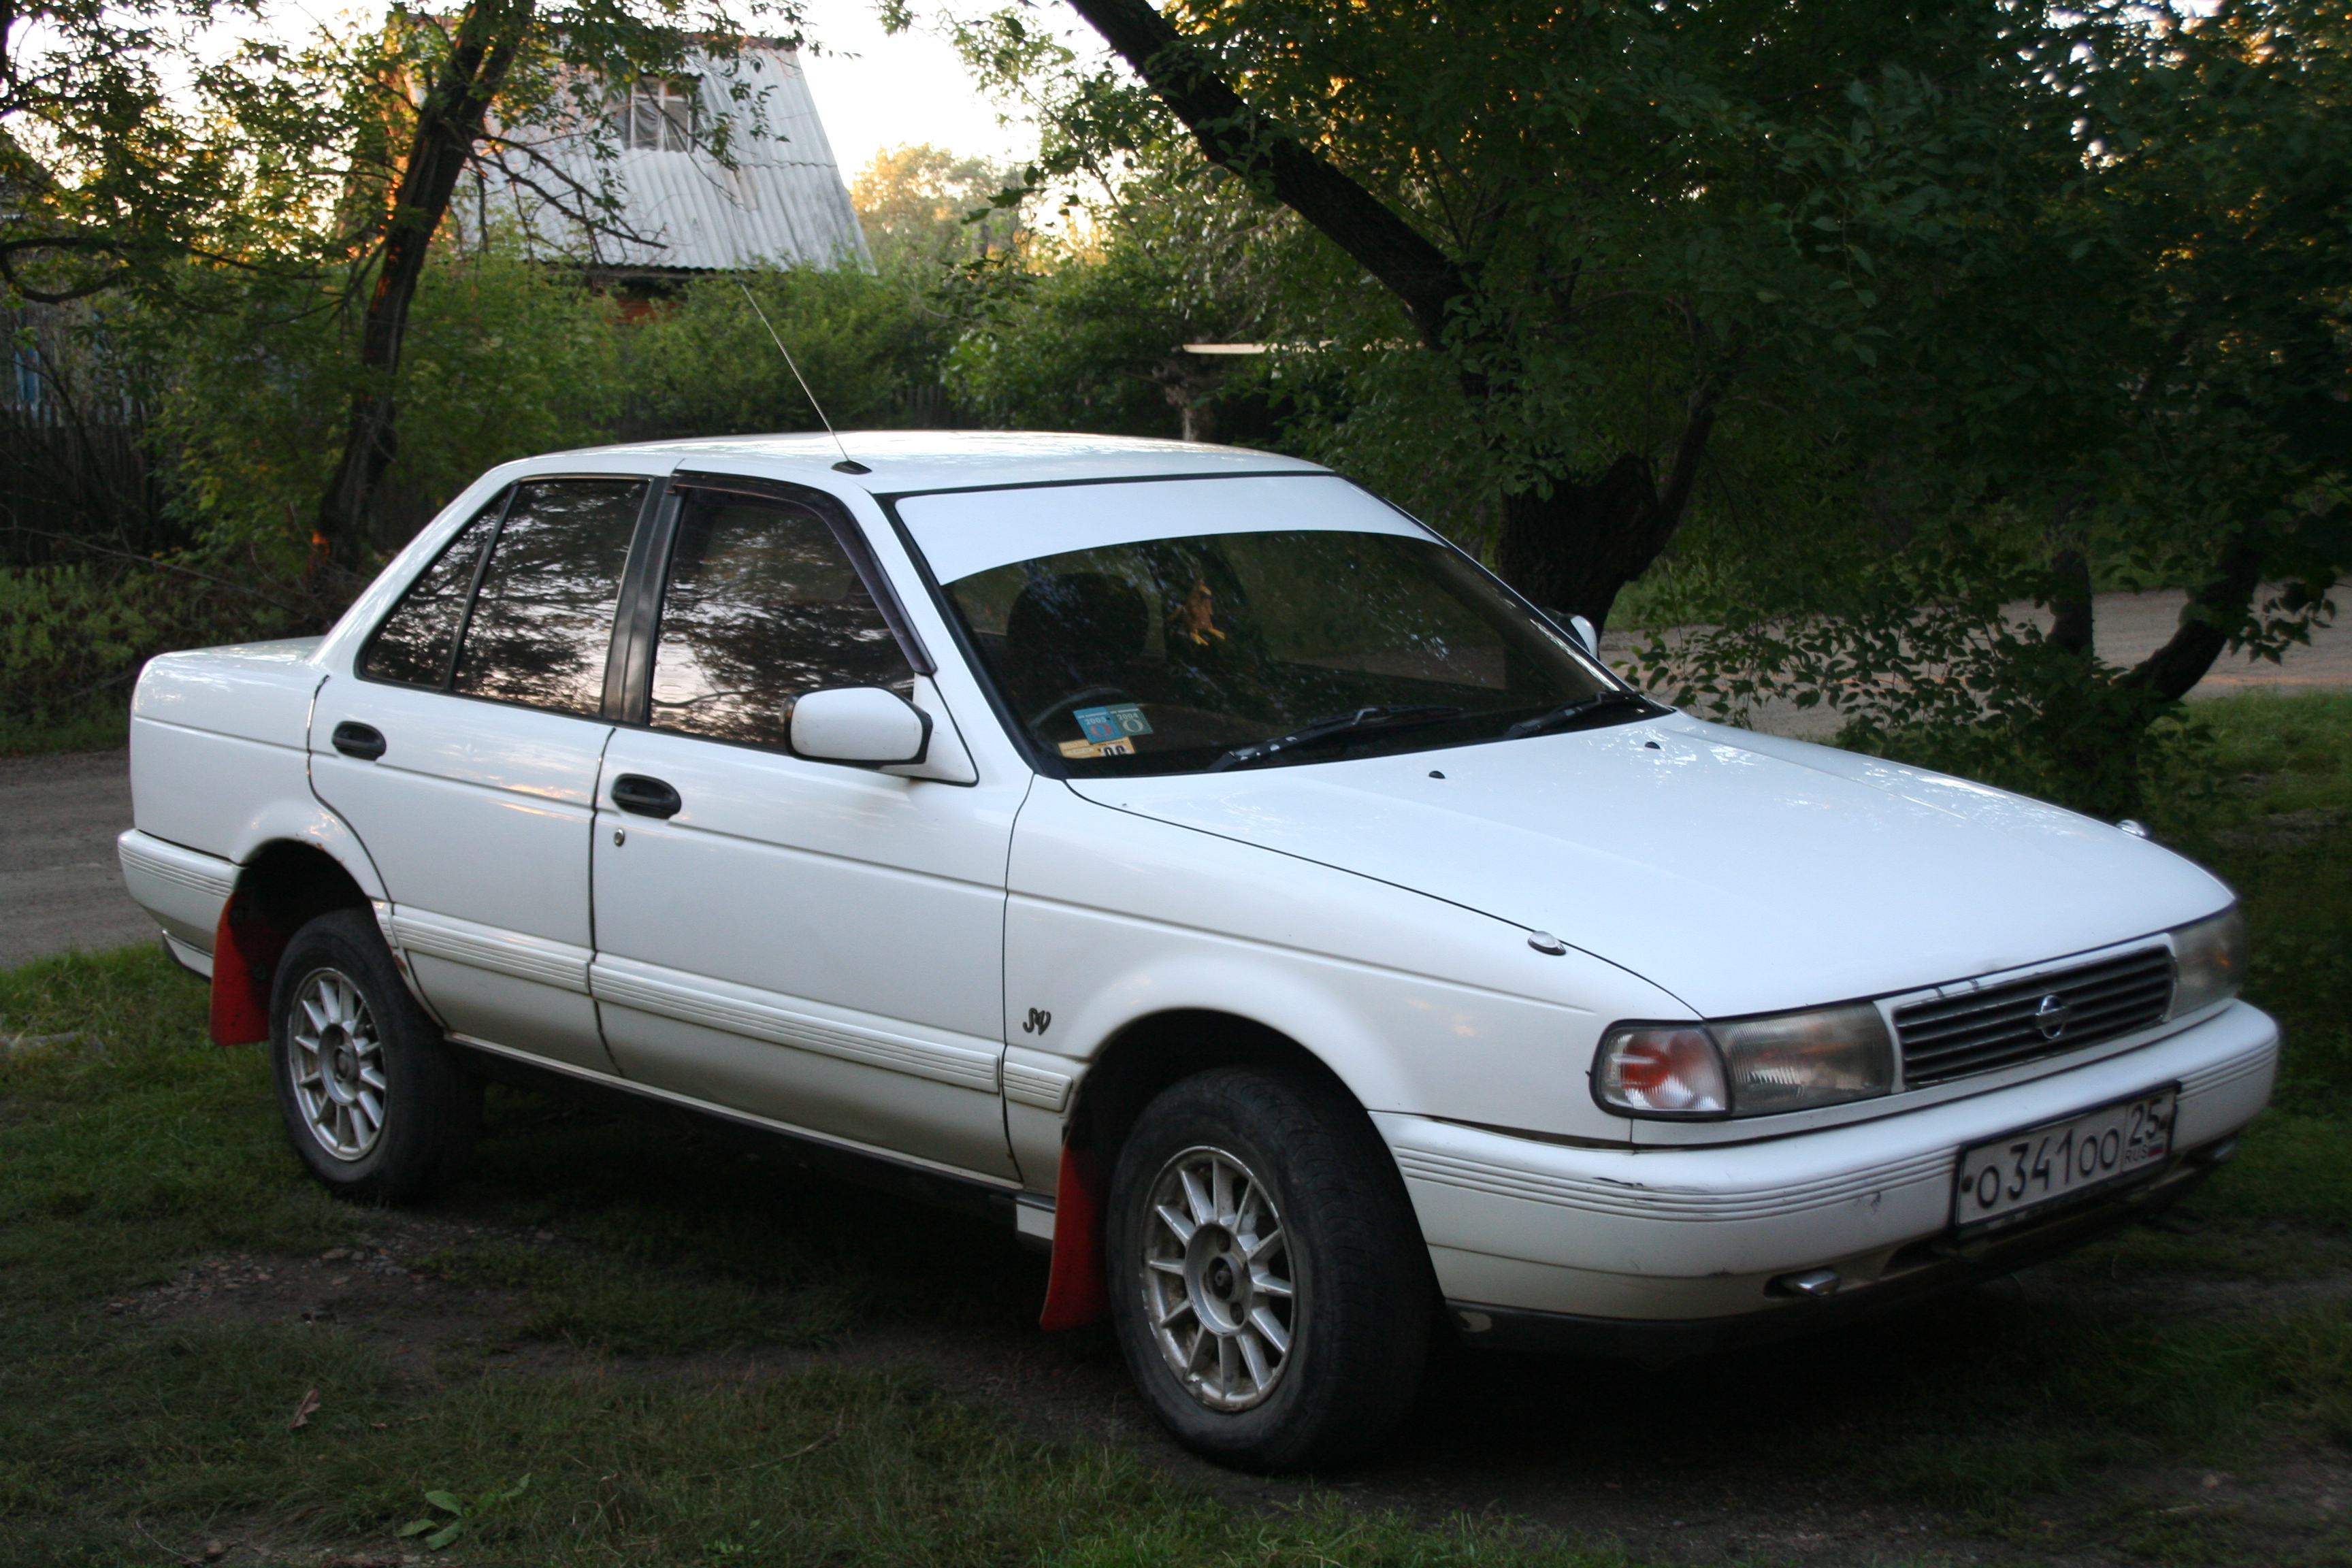 Nissan sunny 1991 picture #3